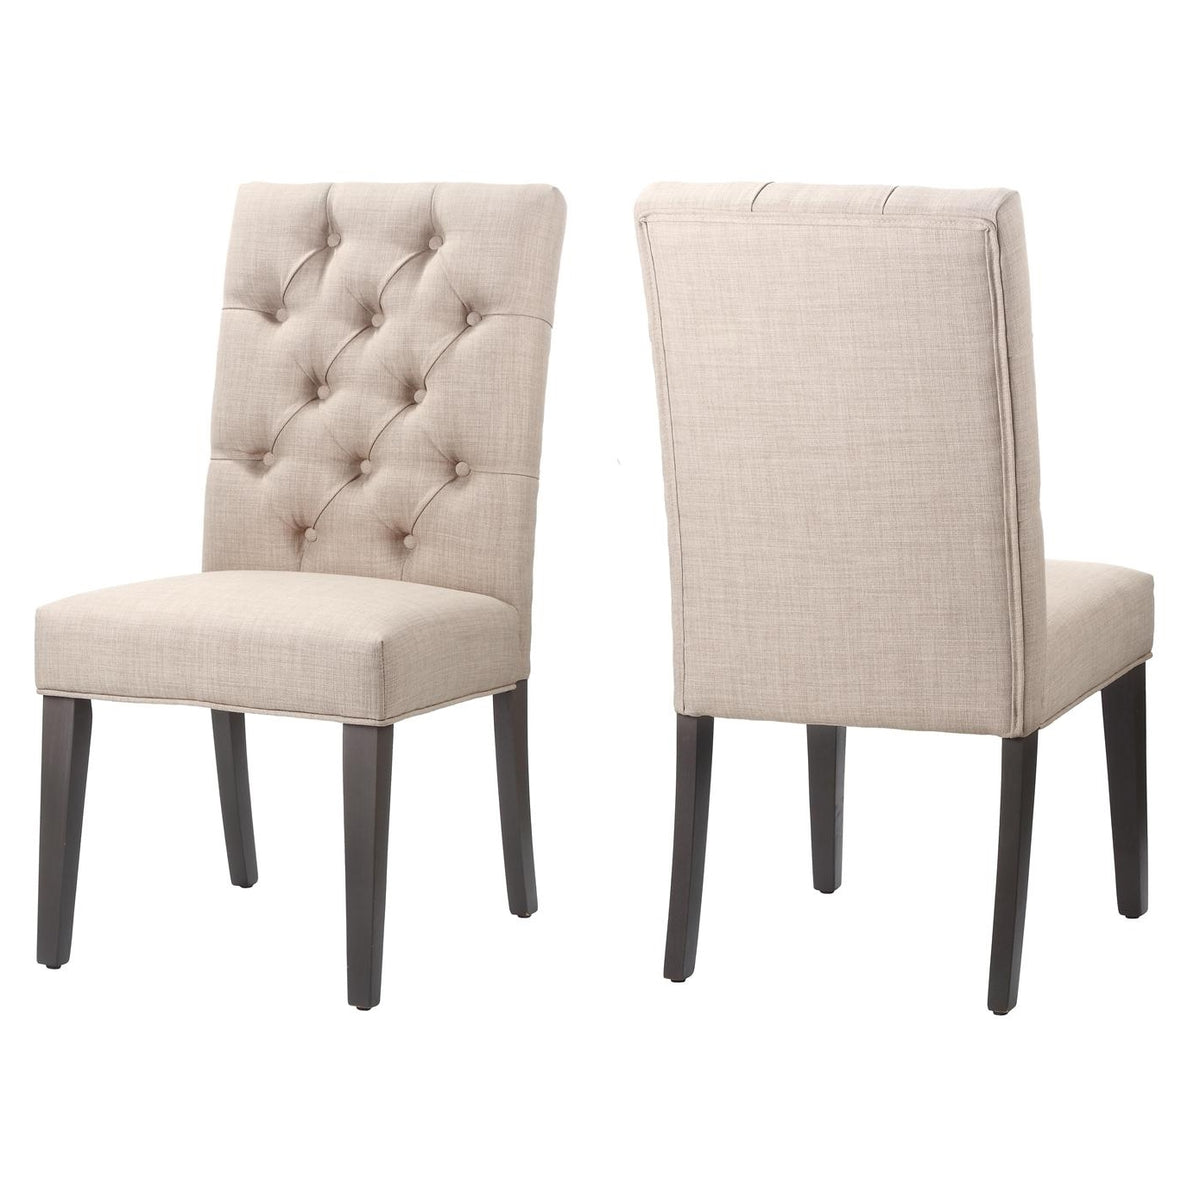 Fabric Upholstered Wooden Chair with Button Tufting, Set of 2, Beige and Black - BM187611